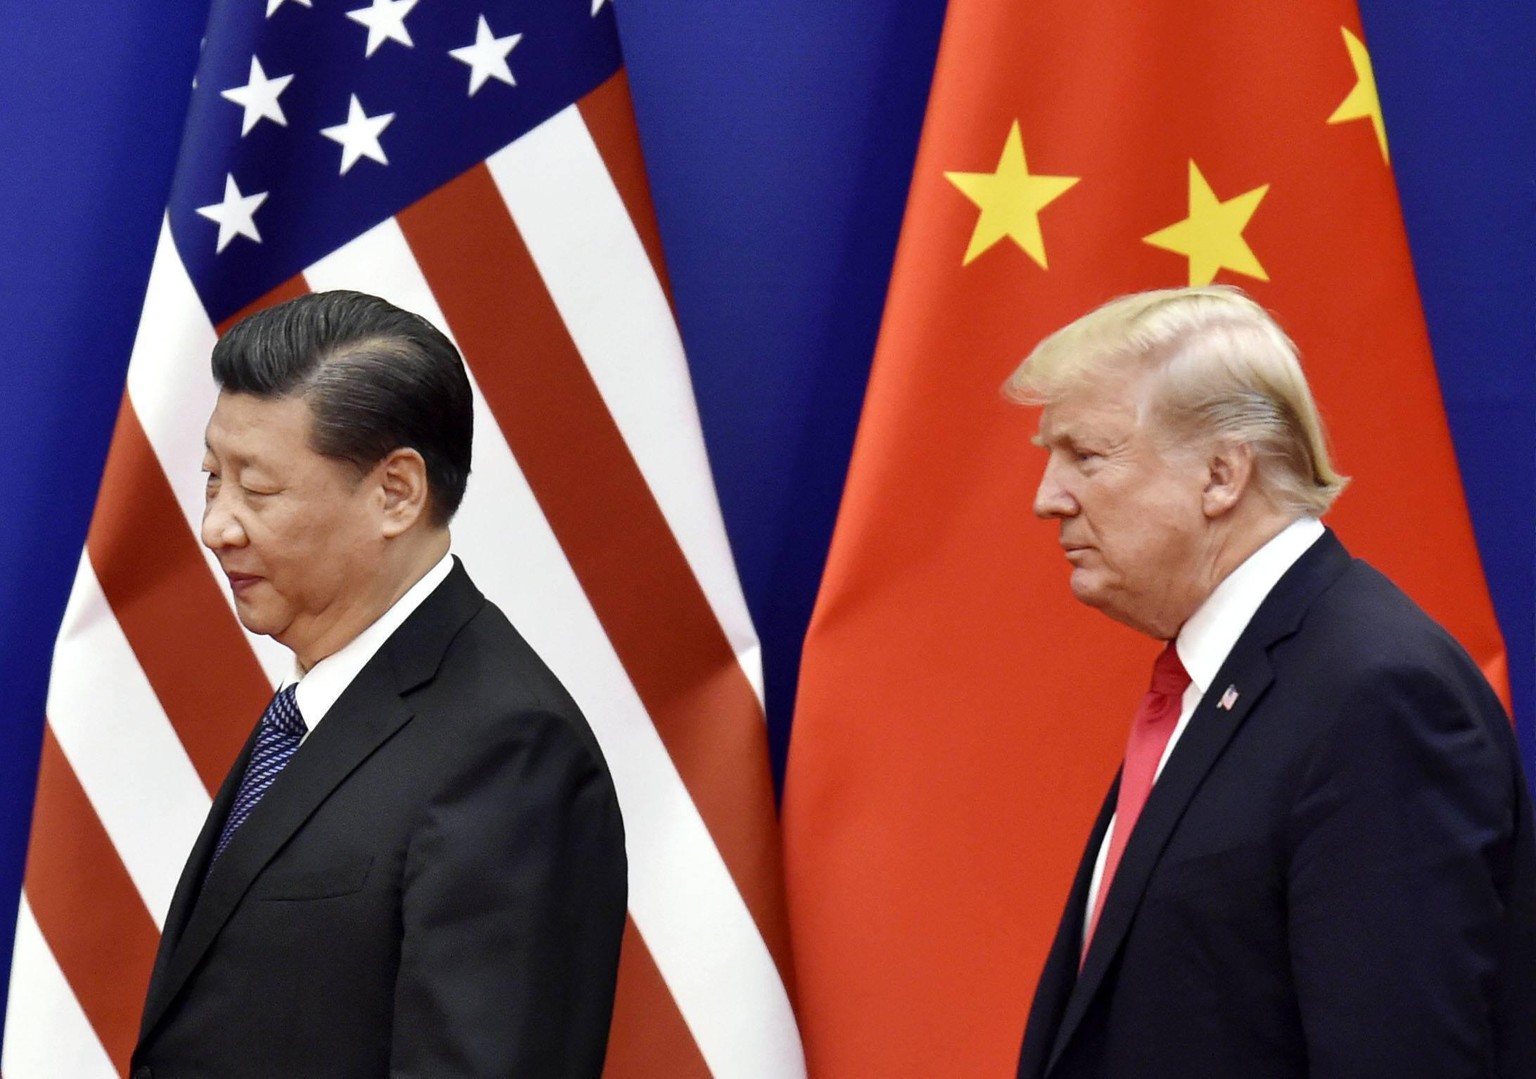 Trump and Xi File photo taken in November 2017 shows U.S. President Donald Trump R and Chinese President Xi Jinping at the Great Hall of the People in Beijing. PUBLICATIONxINxGERxSUIxAUTxHUNxONLY